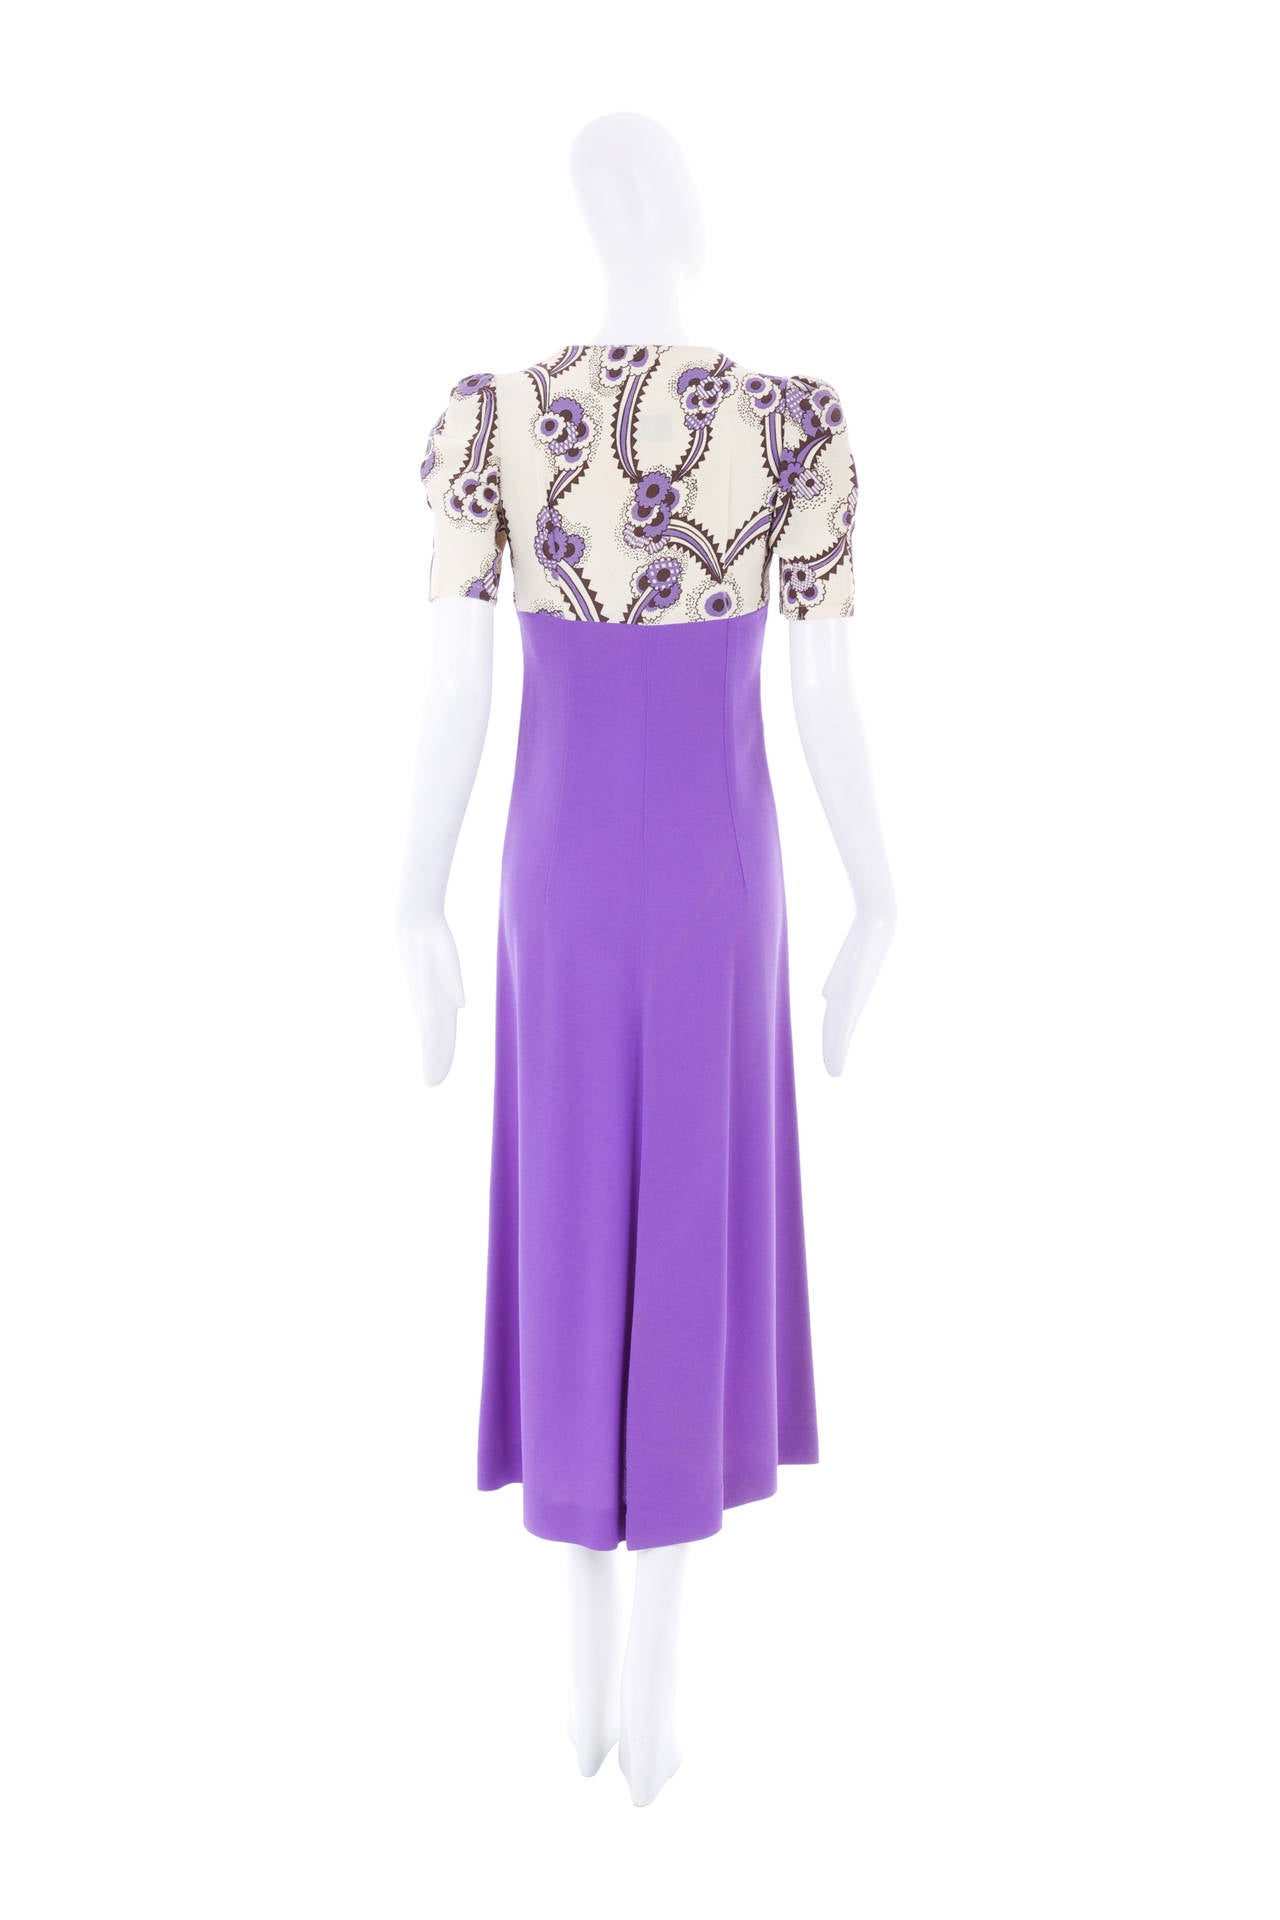 Ossie Clark purple printed dress, circa 1968 In Good Condition For Sale In London, GB